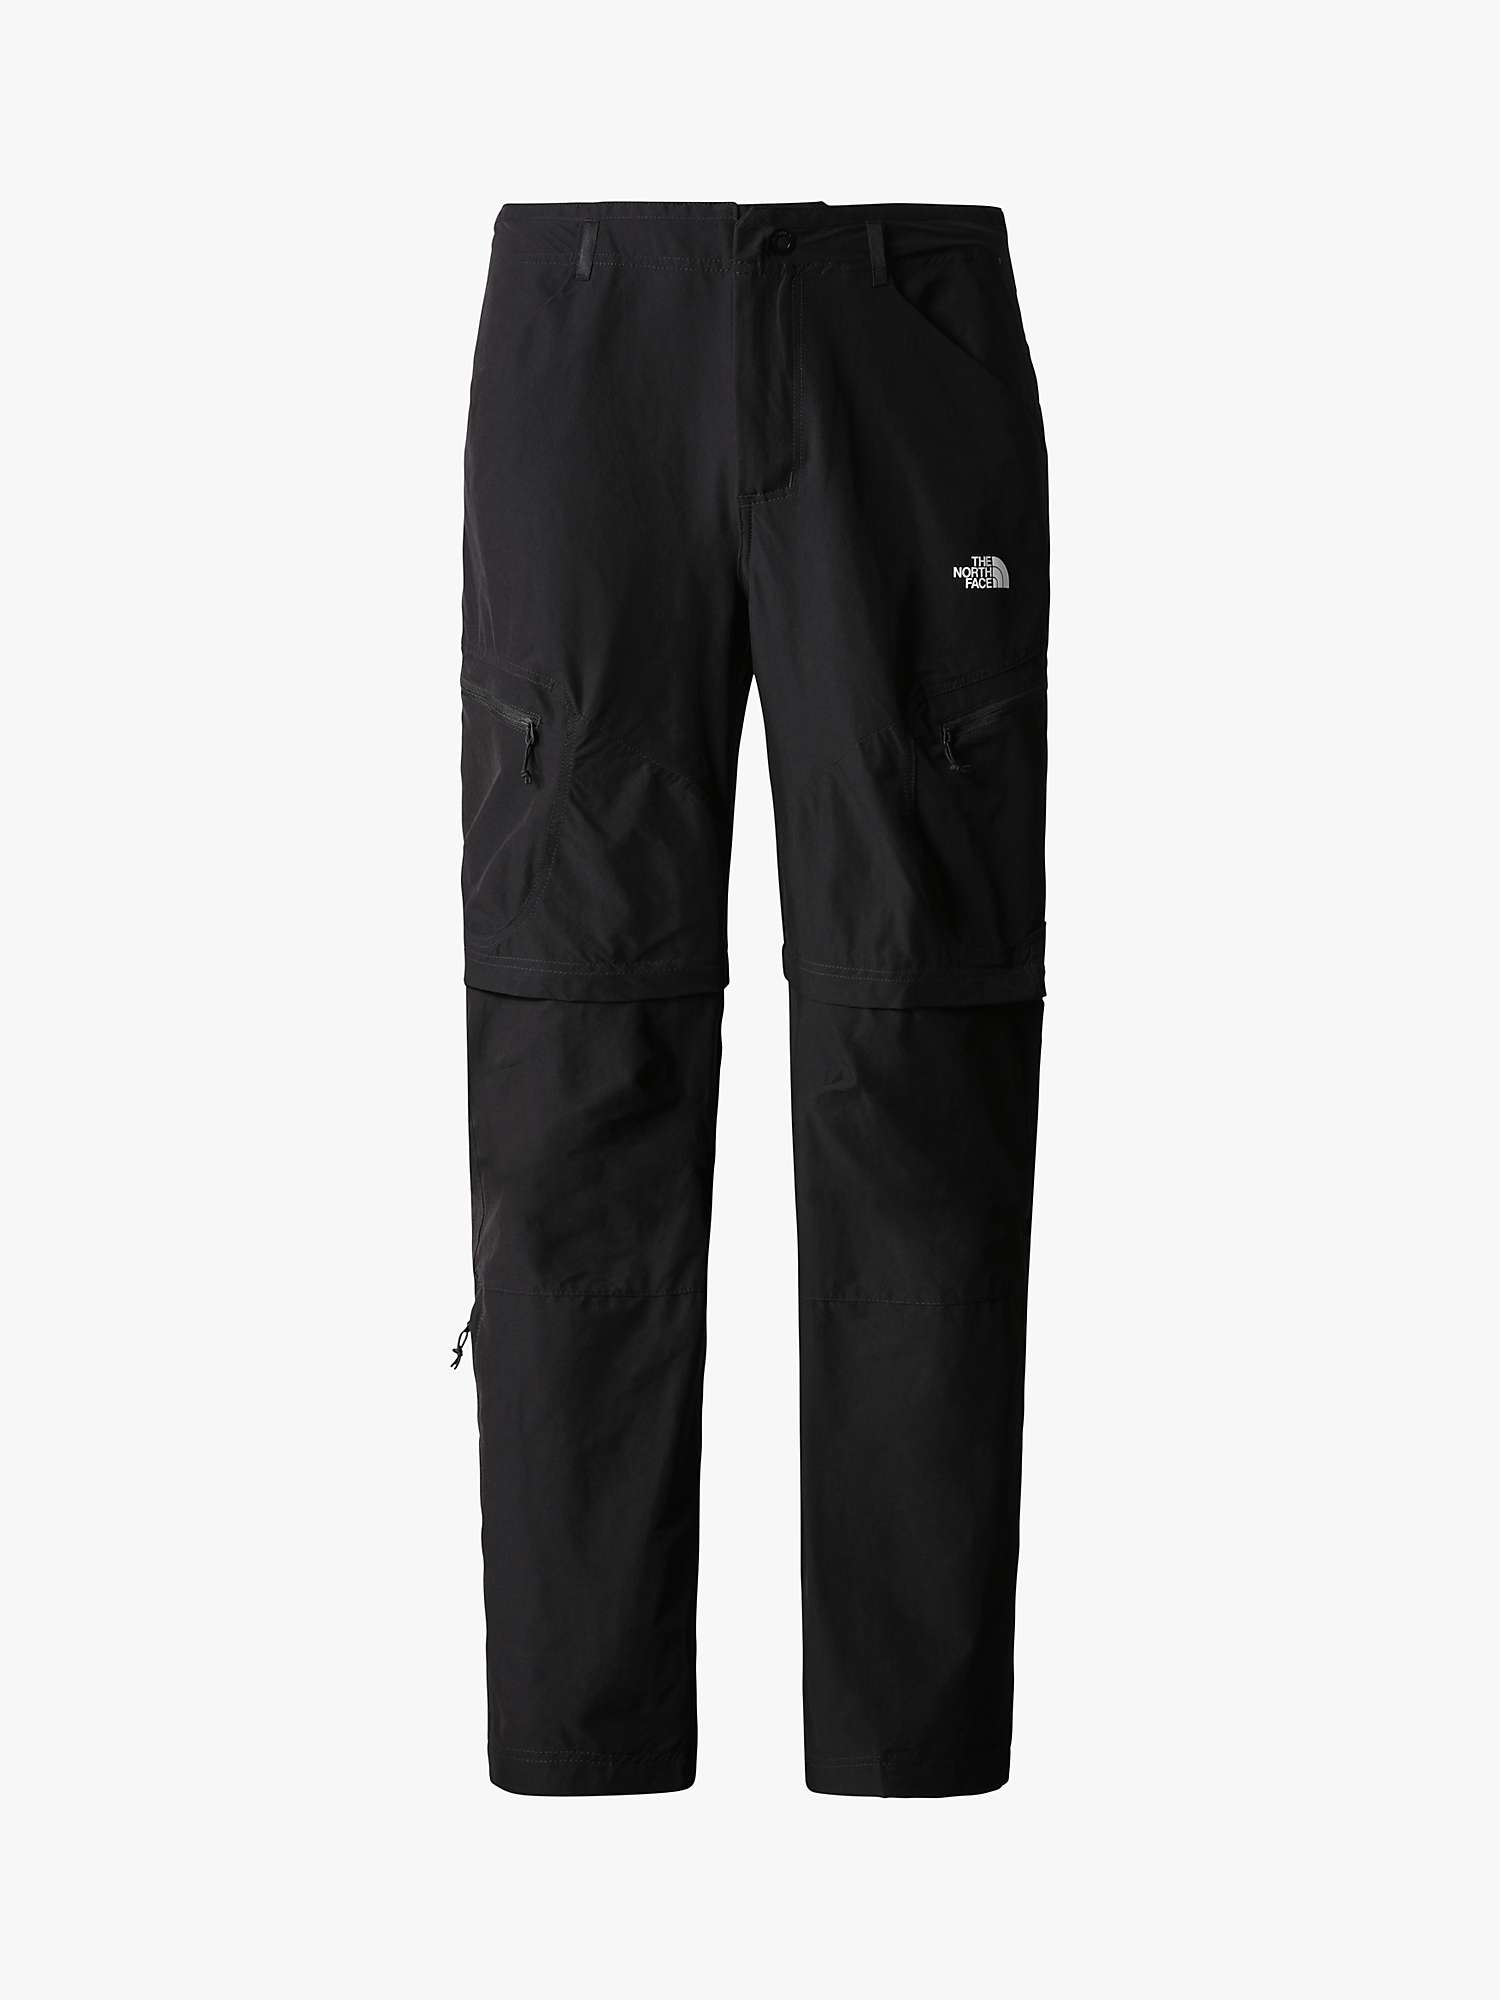 Buy The North Face Exploration Convertible Regular Tapered Trousers Online at johnlewis.com